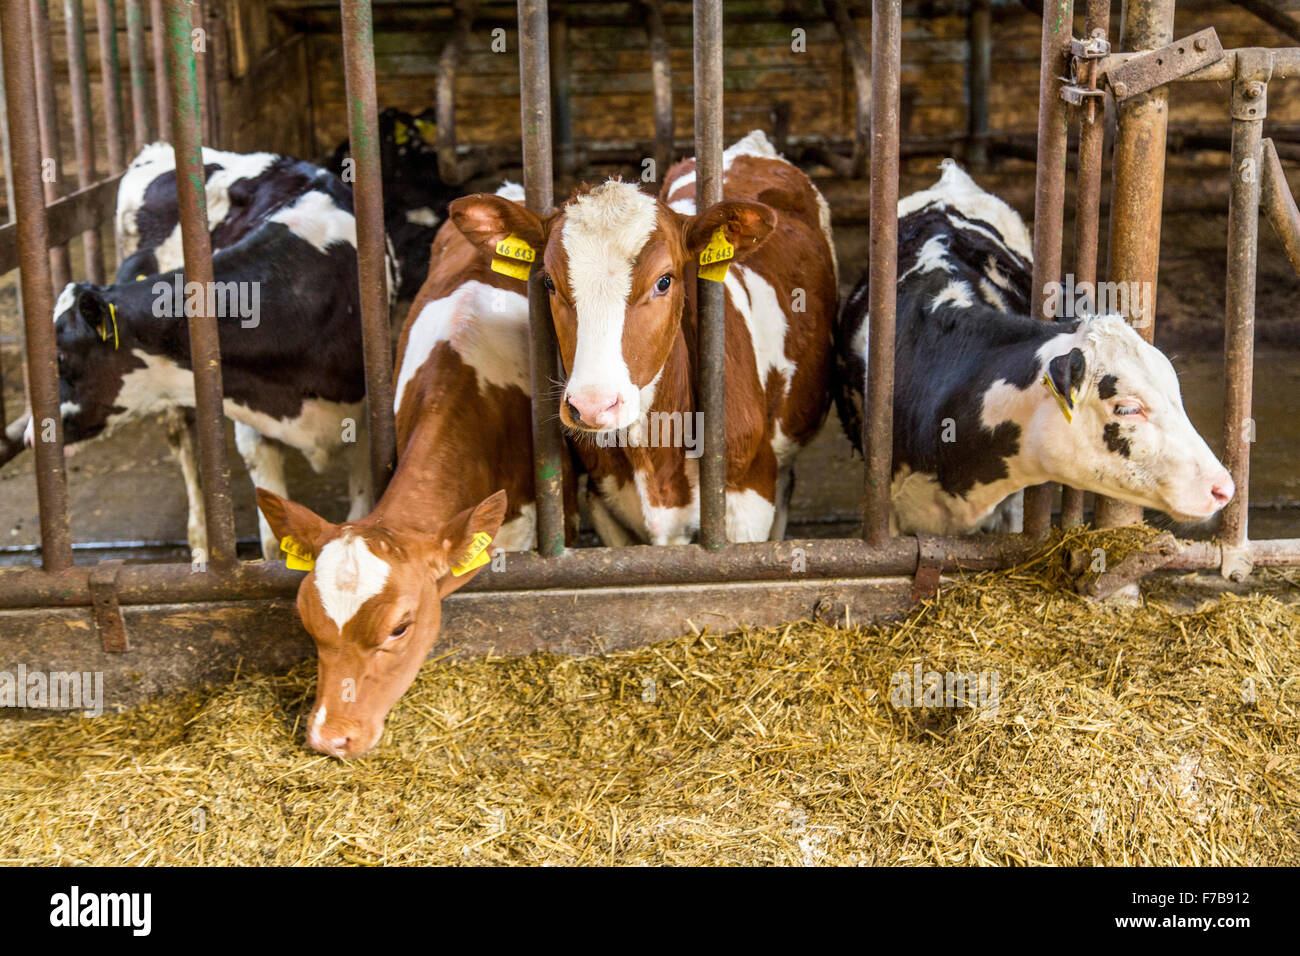 Calves in a stall, eat silage, Stock Photo